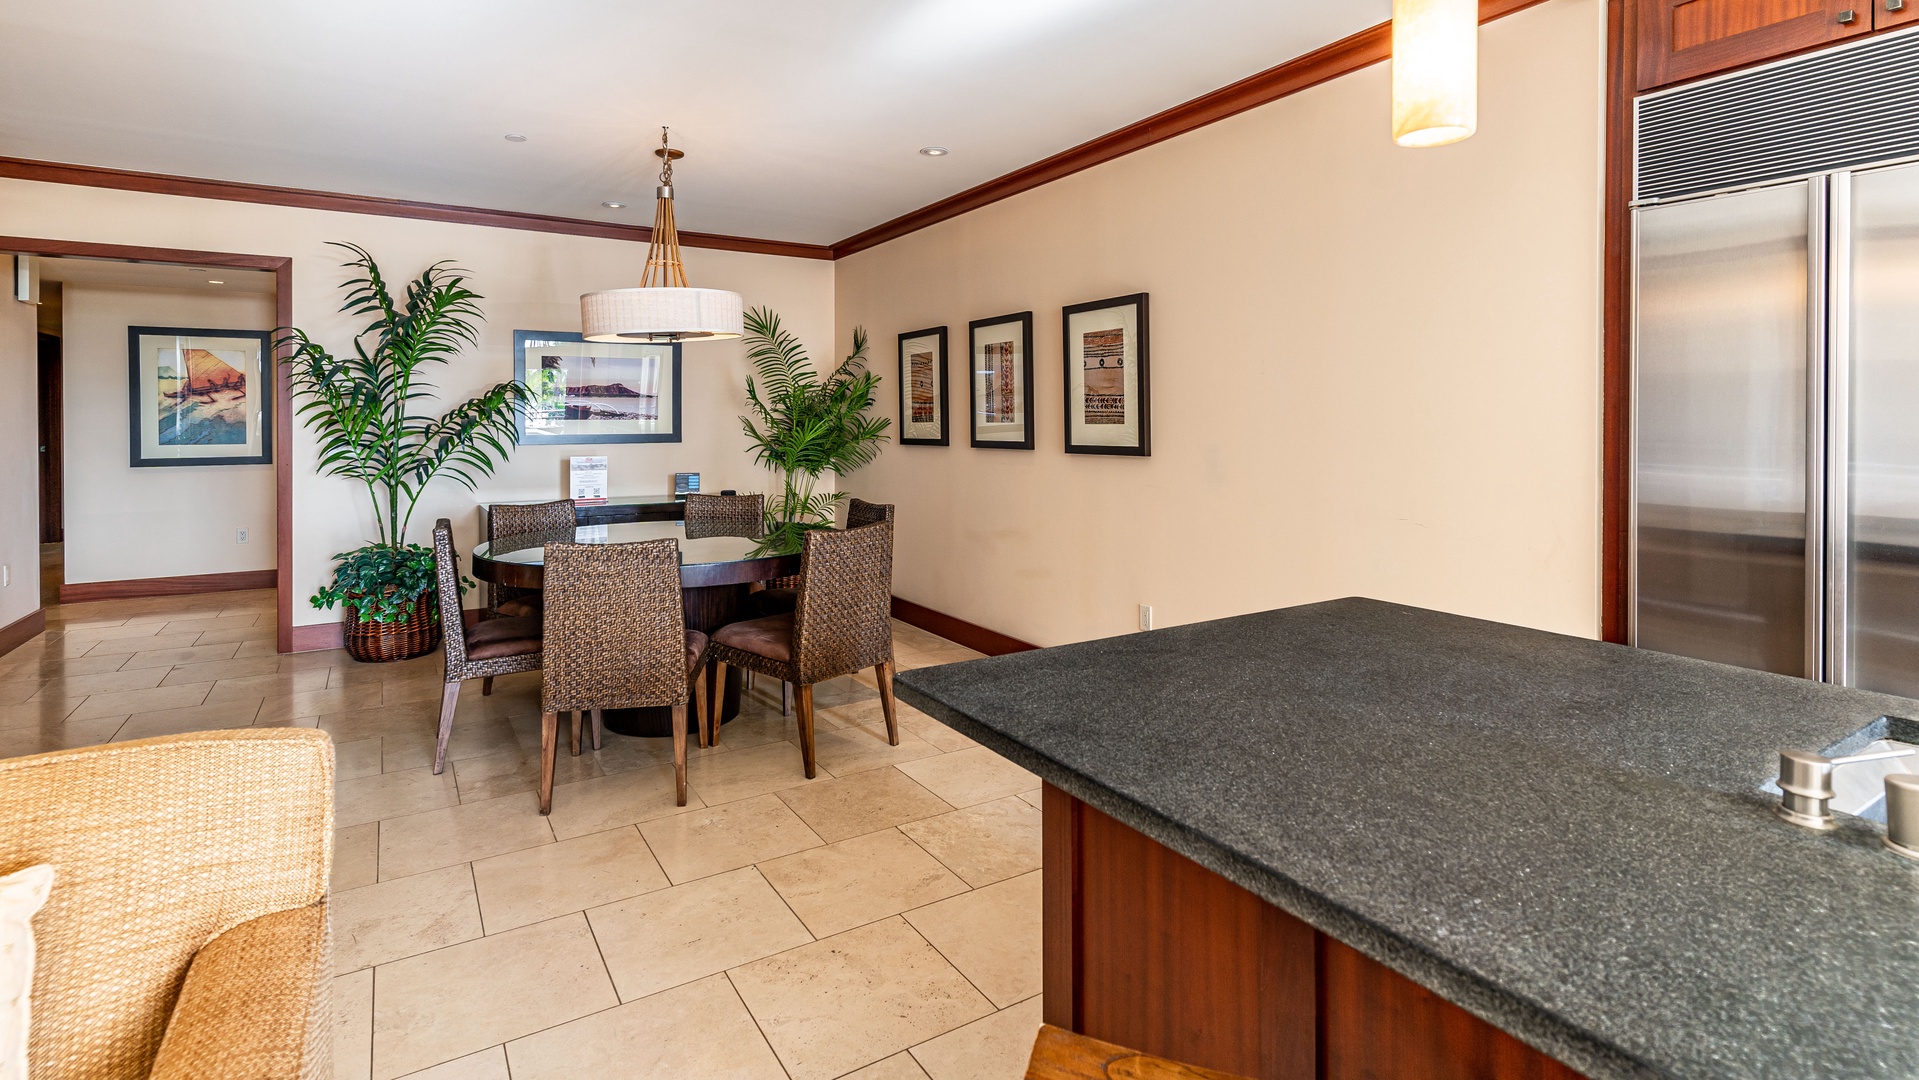 Kapolei Vacation Rentals, Ko Olina Beach Villas O401 - Converse with your guests in the kitchen.